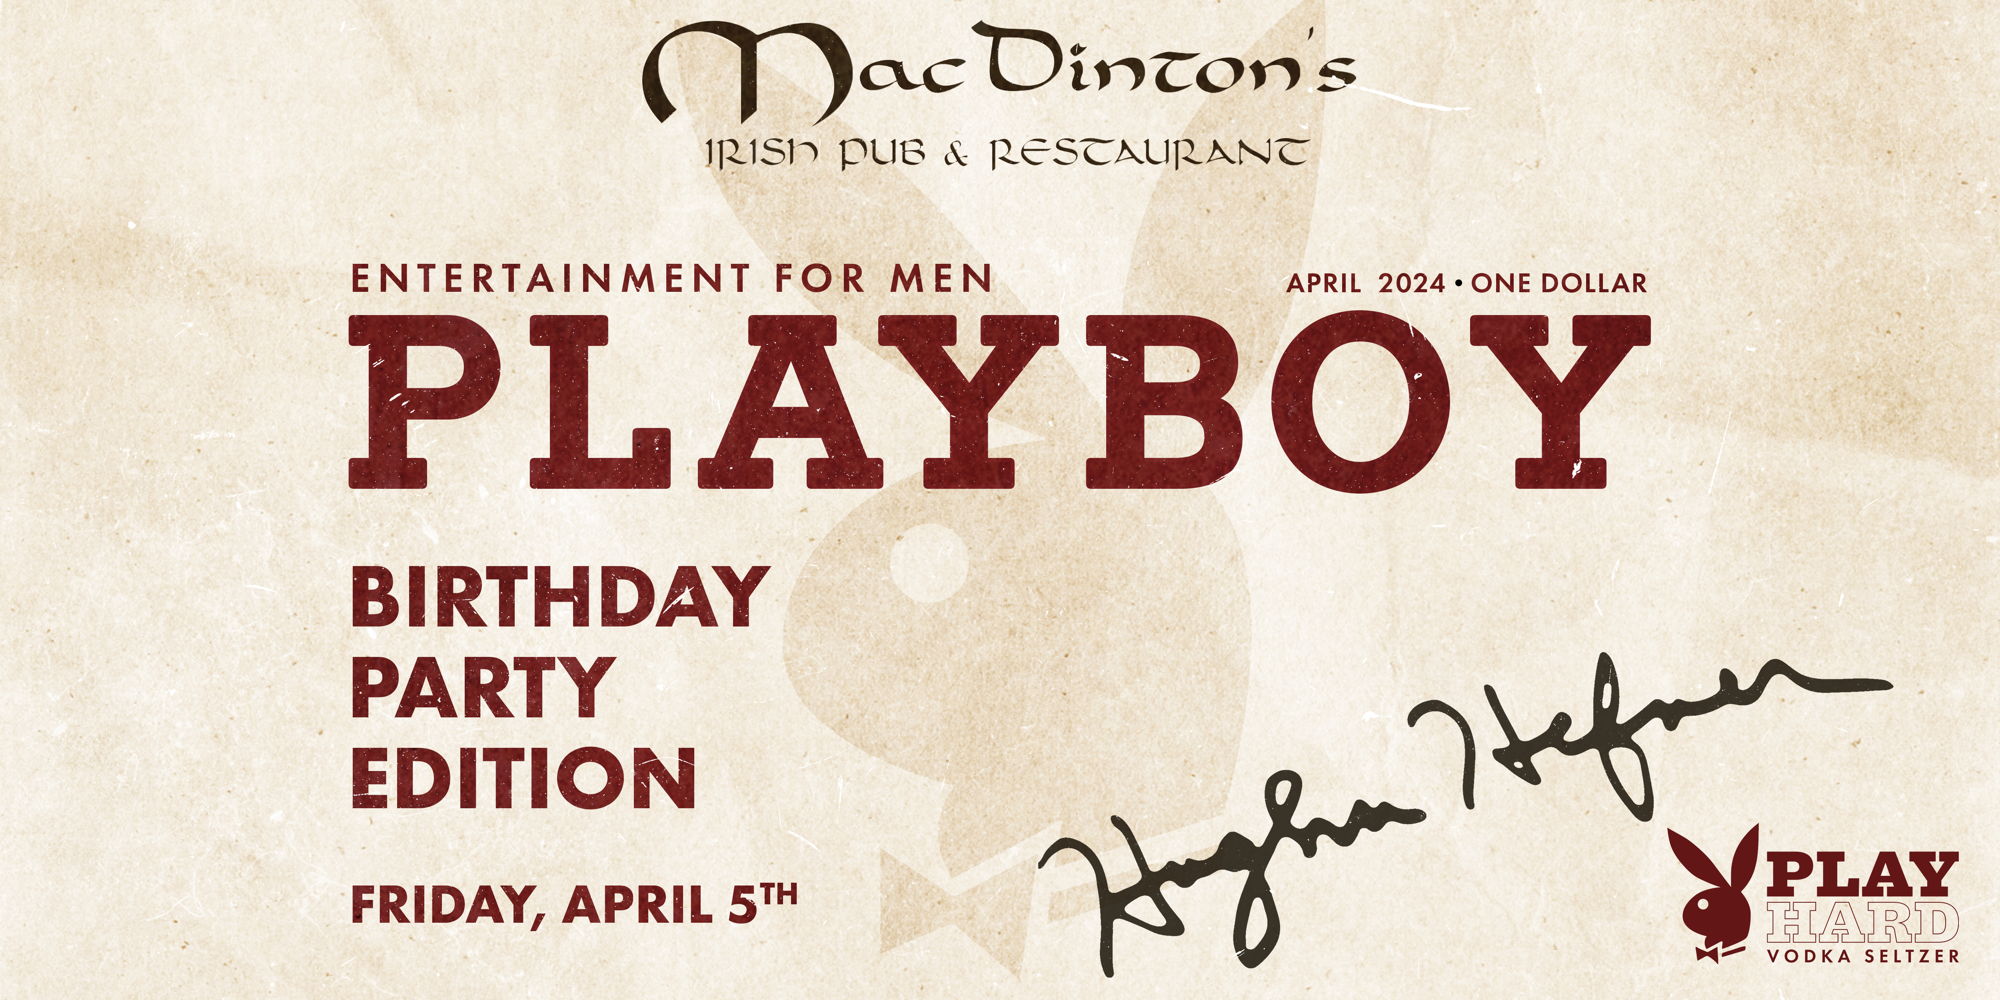 Playboy Birthday Party Edition!  promotional image